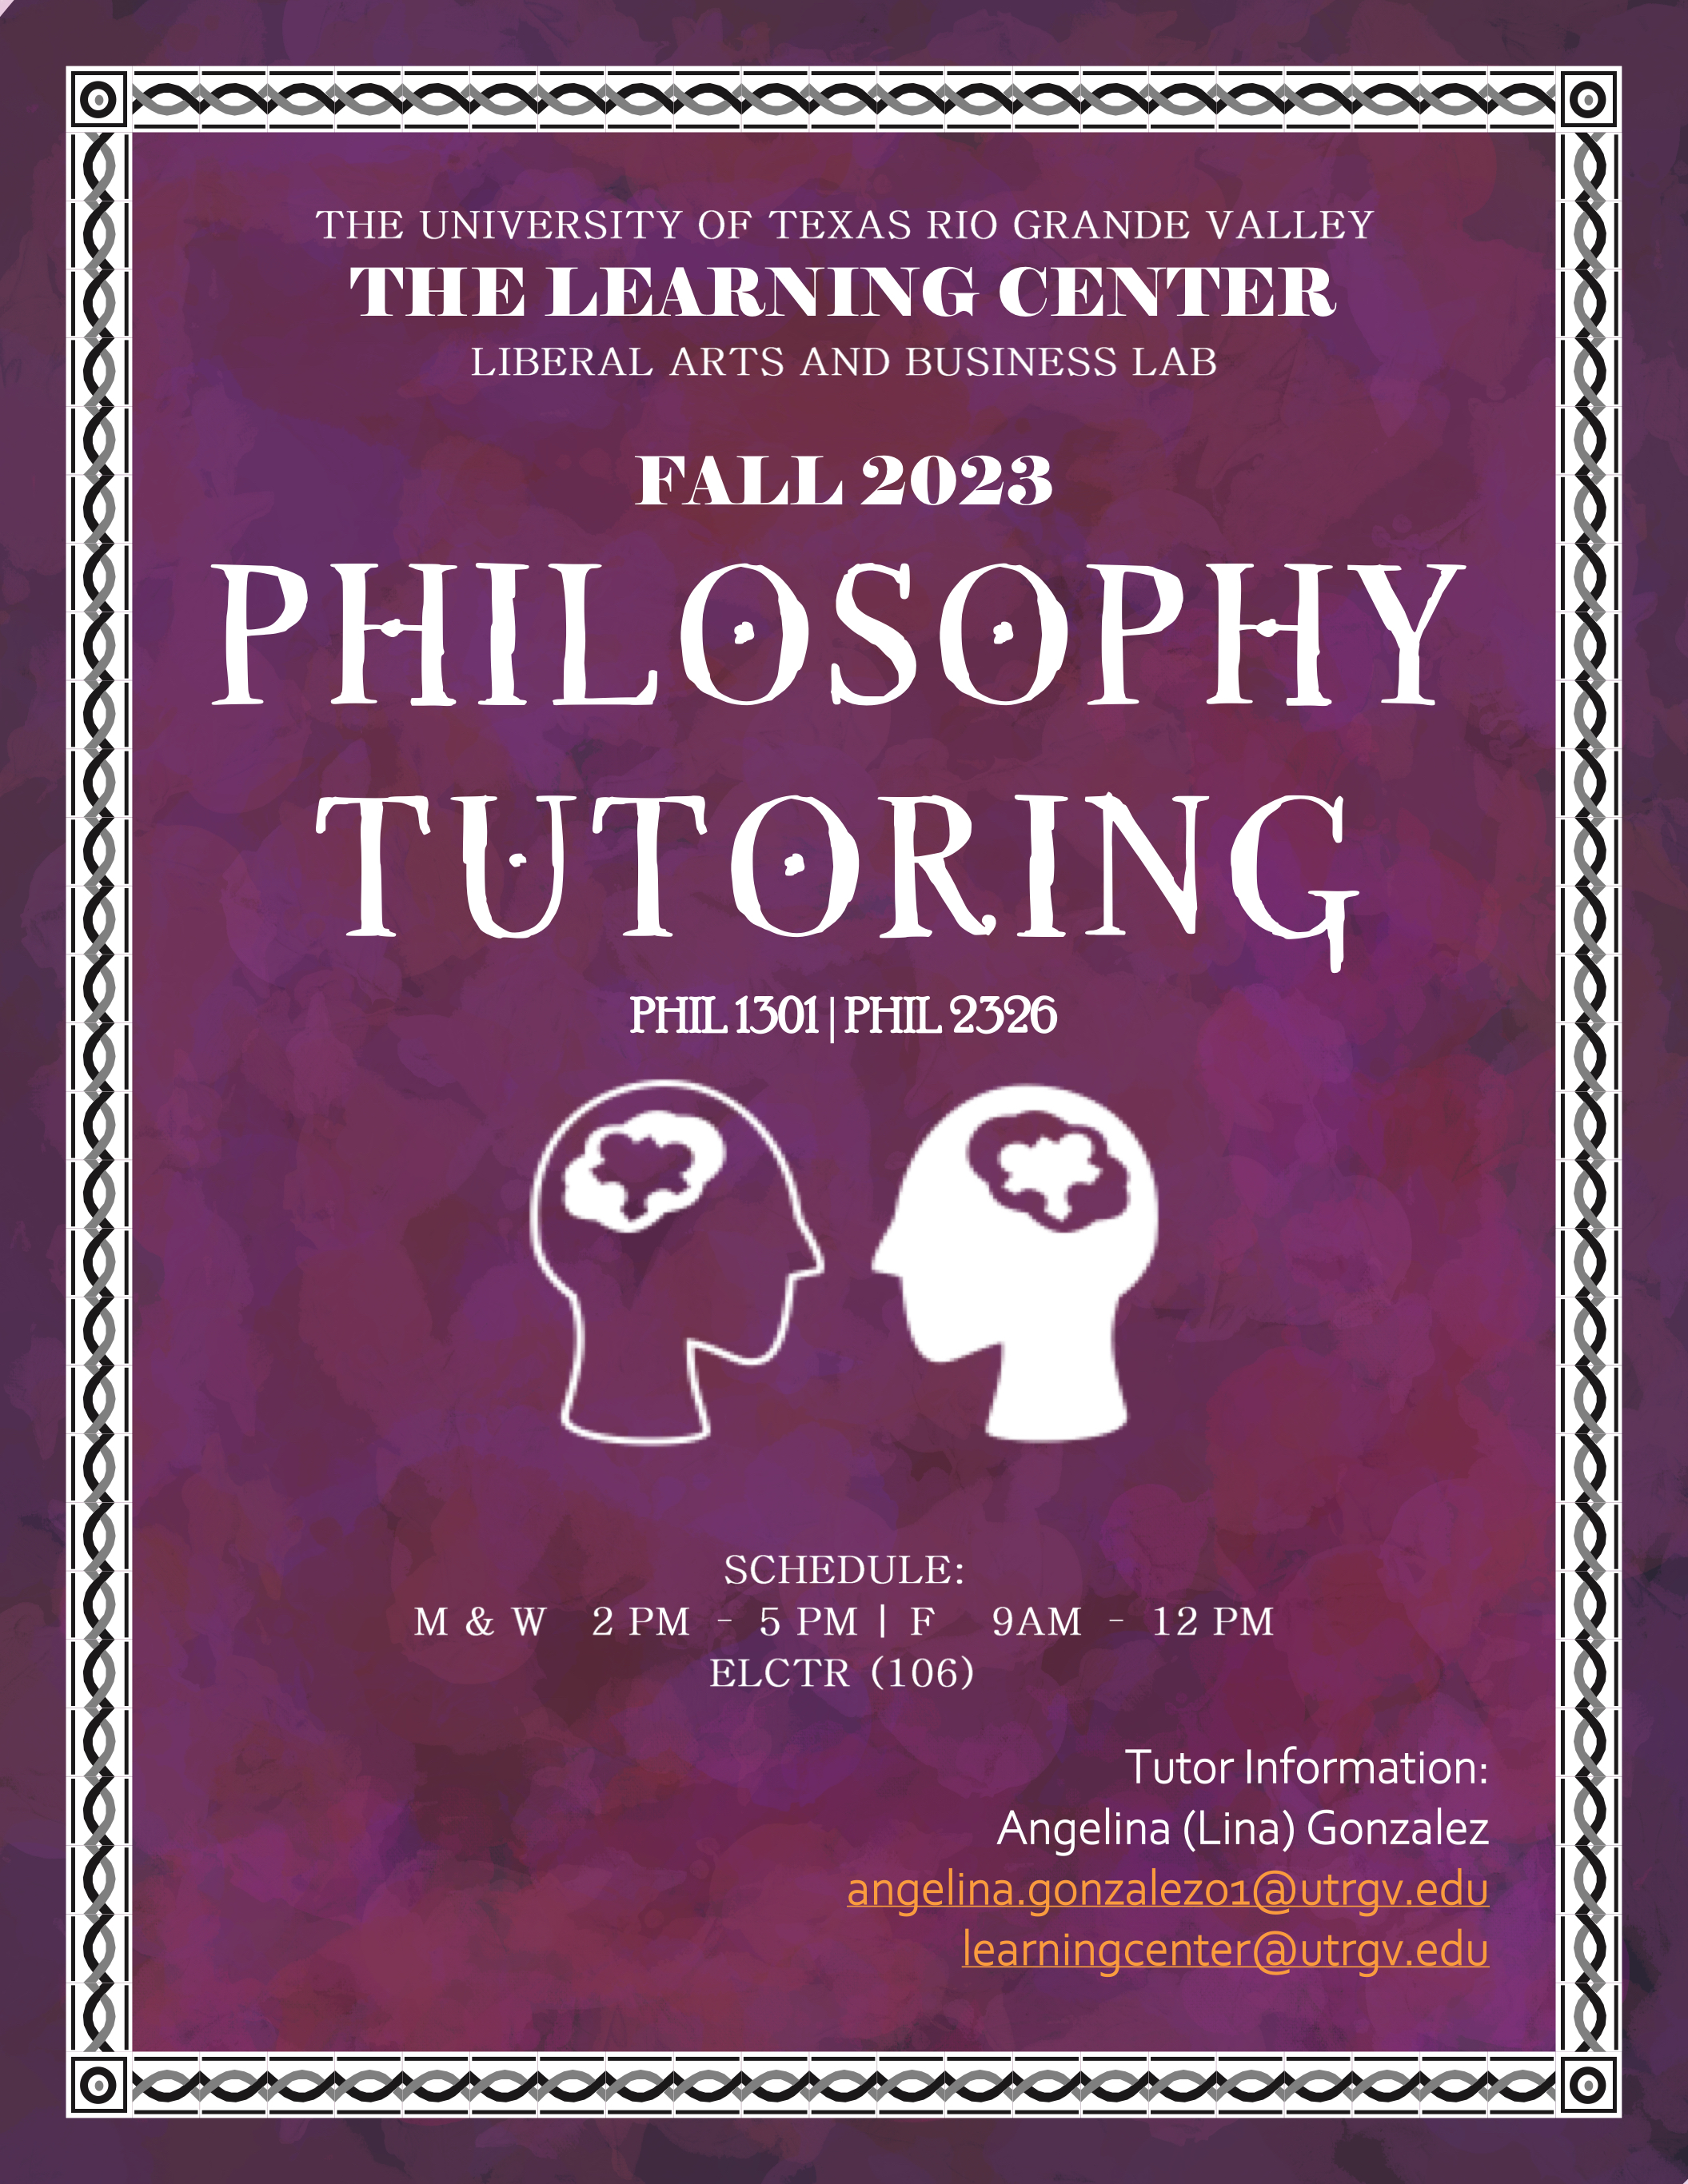 Philosophy tutoring is available in Edinburg this fall